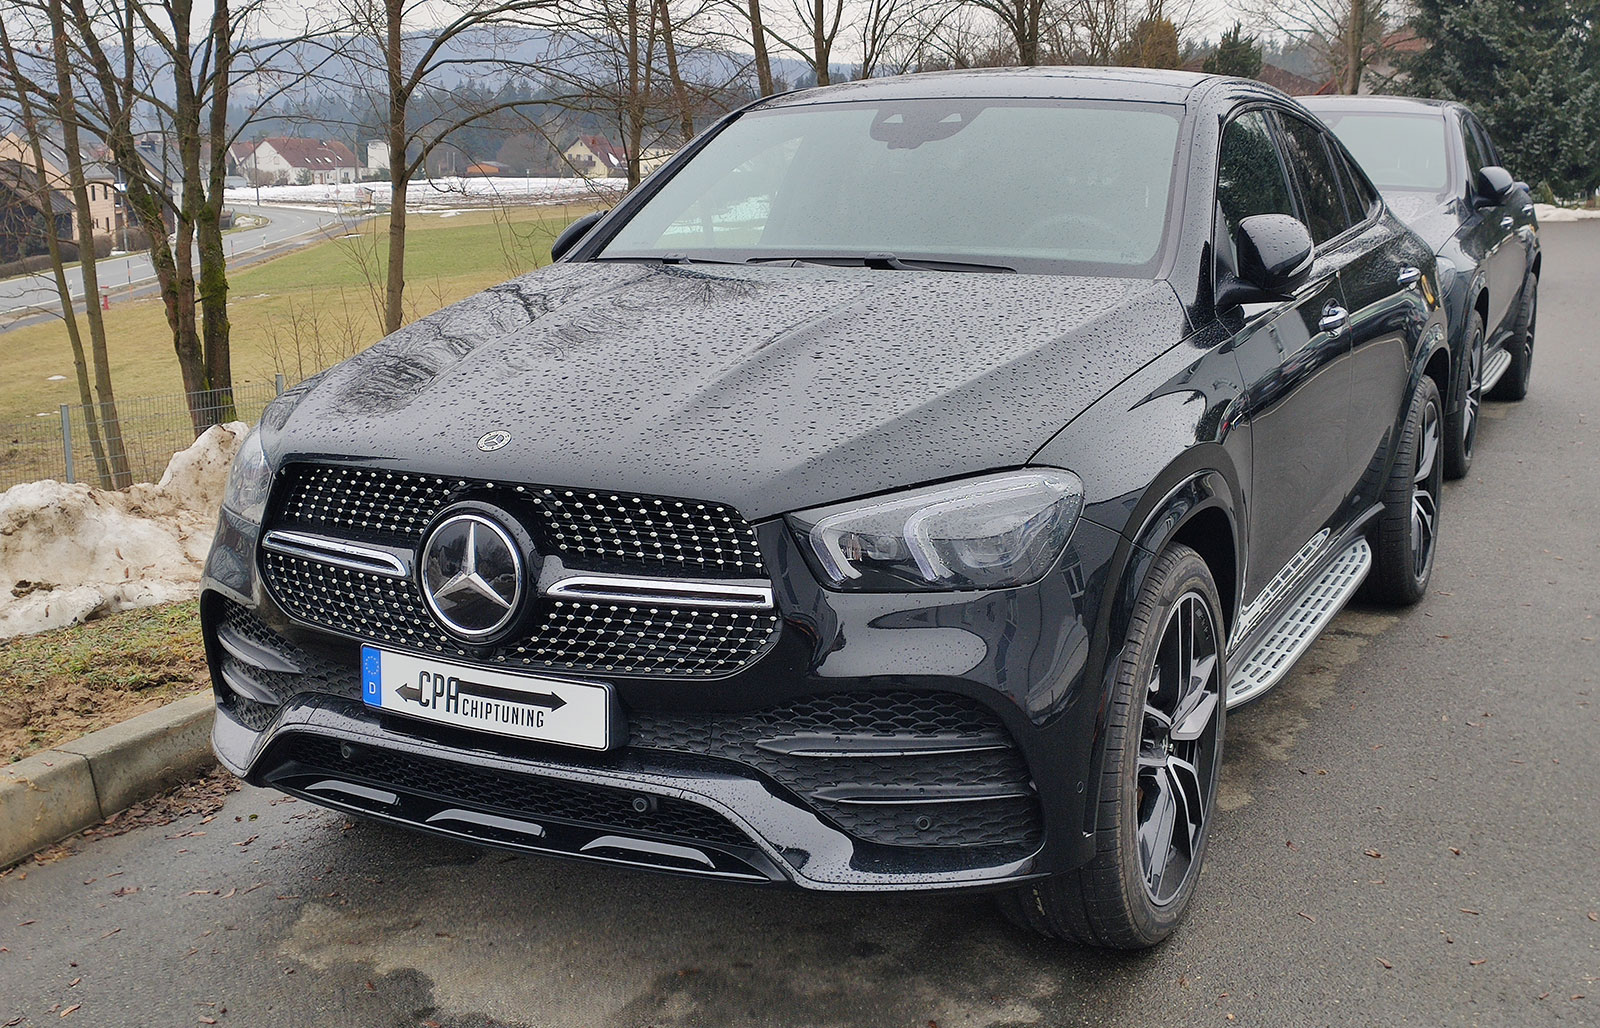 The new Mercedes GLE 350 de being tested at CPA